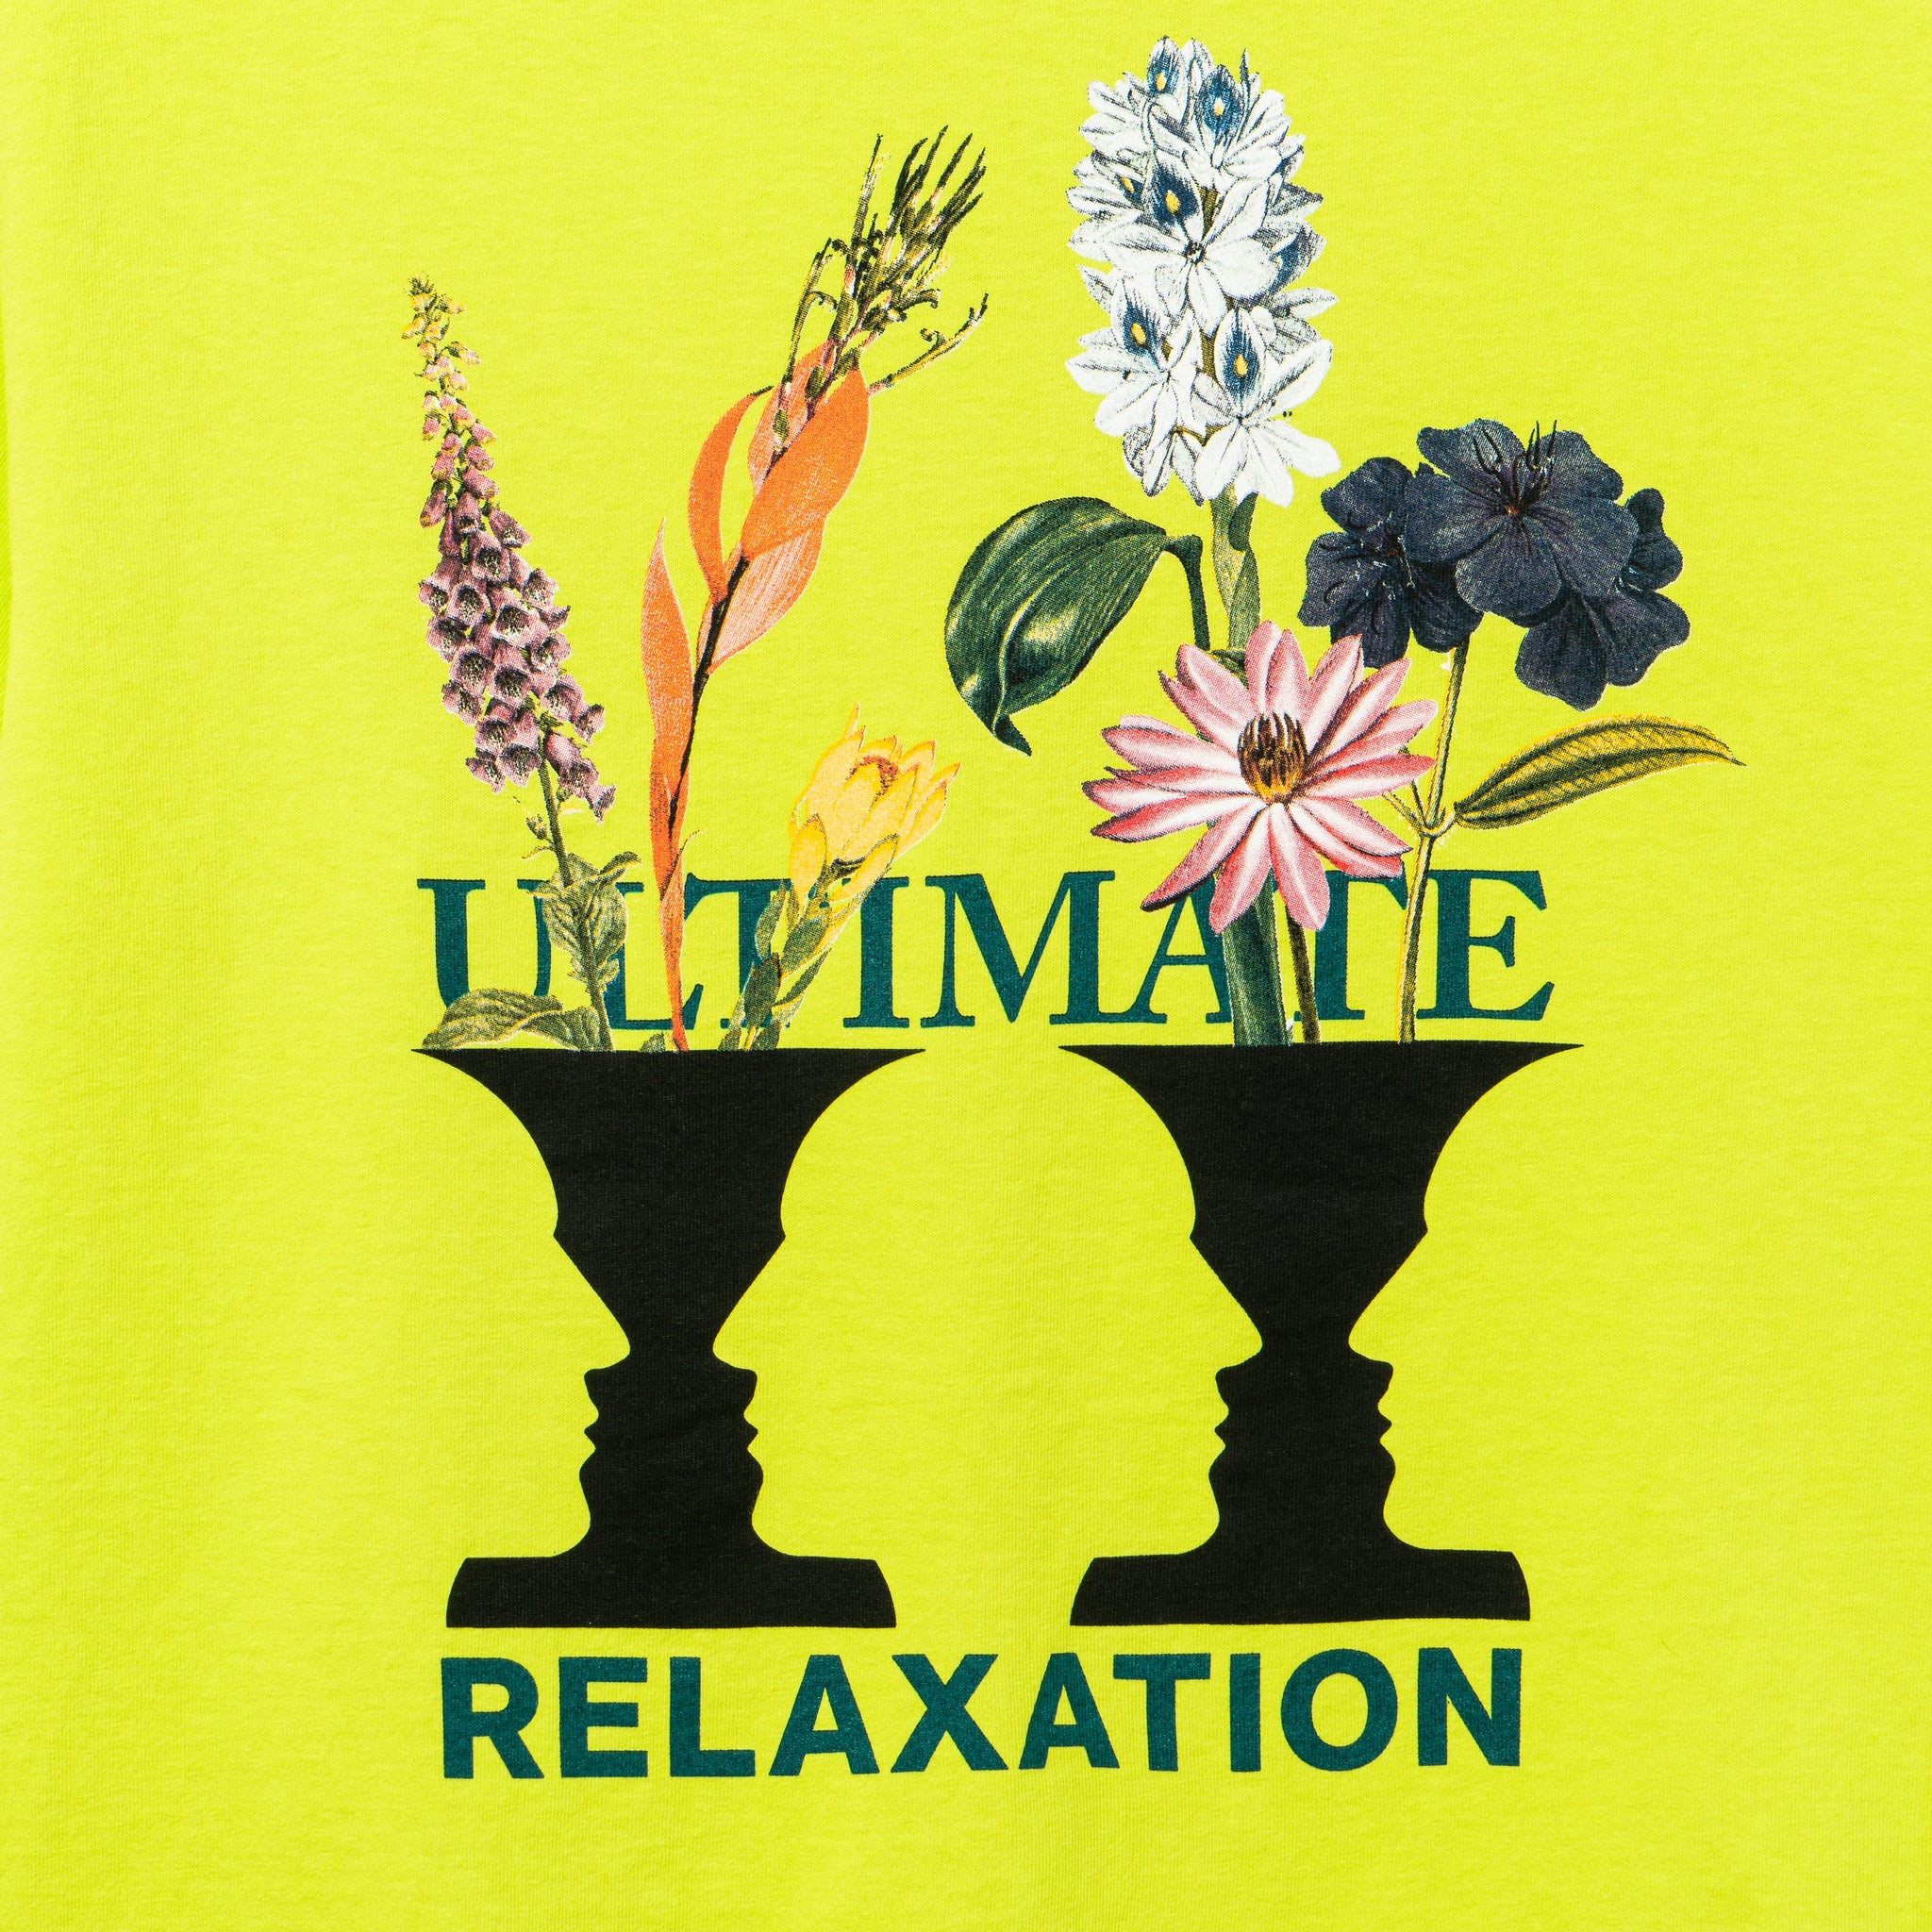 Ultimate Relaxation S/S Tee - Dark Lime